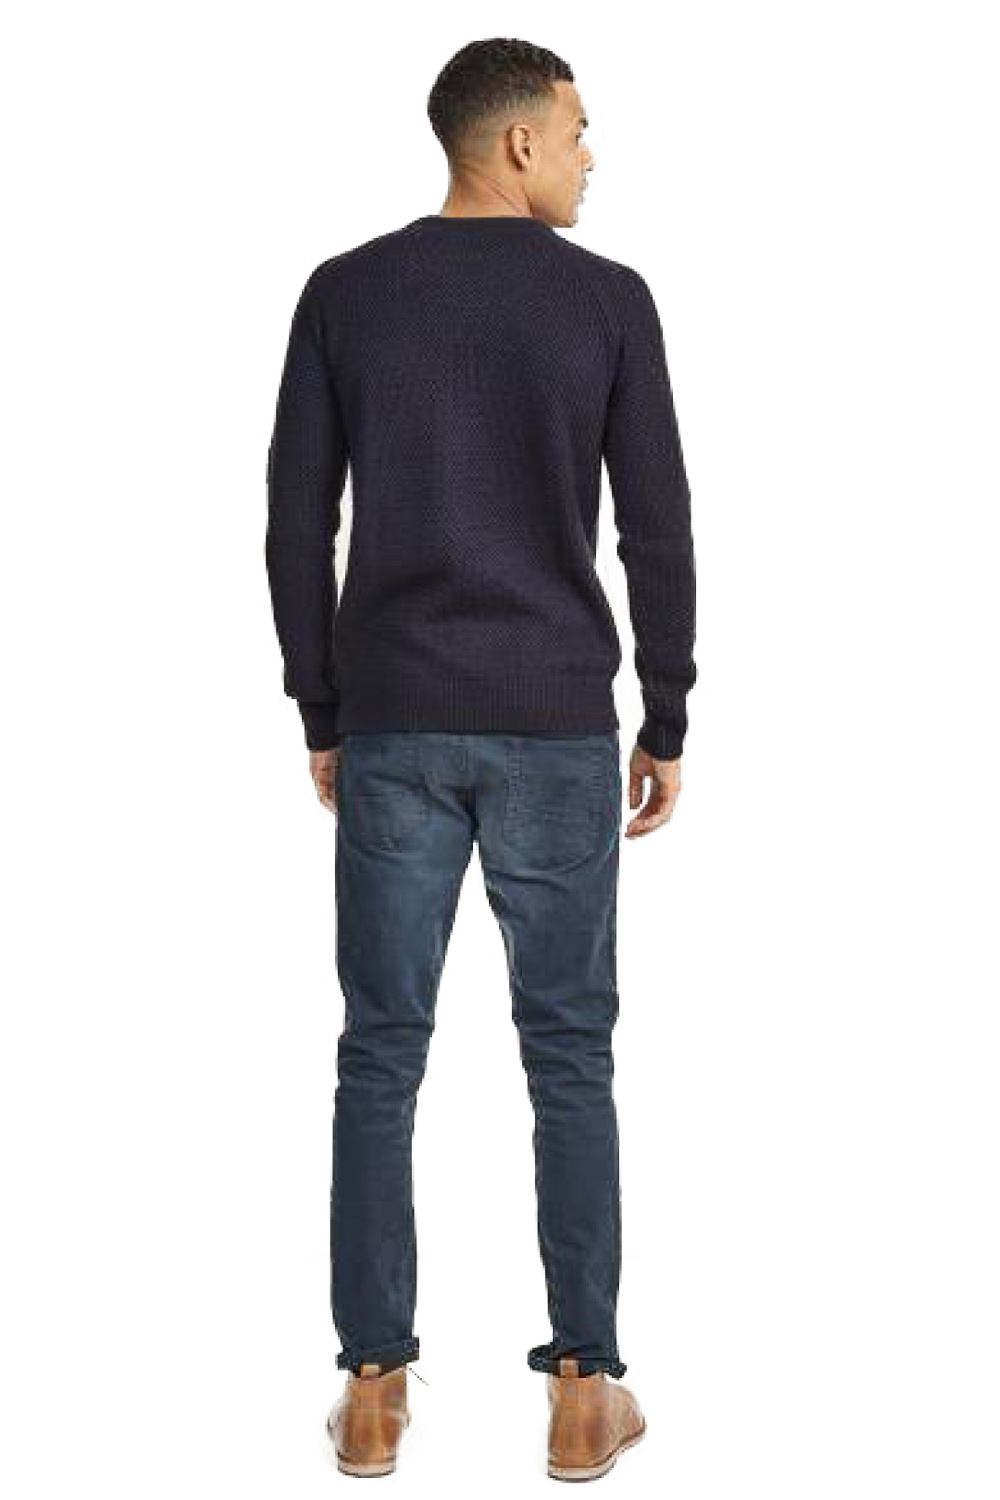 Brave Soul Mens Slovake Cable Knit Jumper Crew Neck Chunky Waffle Knitted Top 